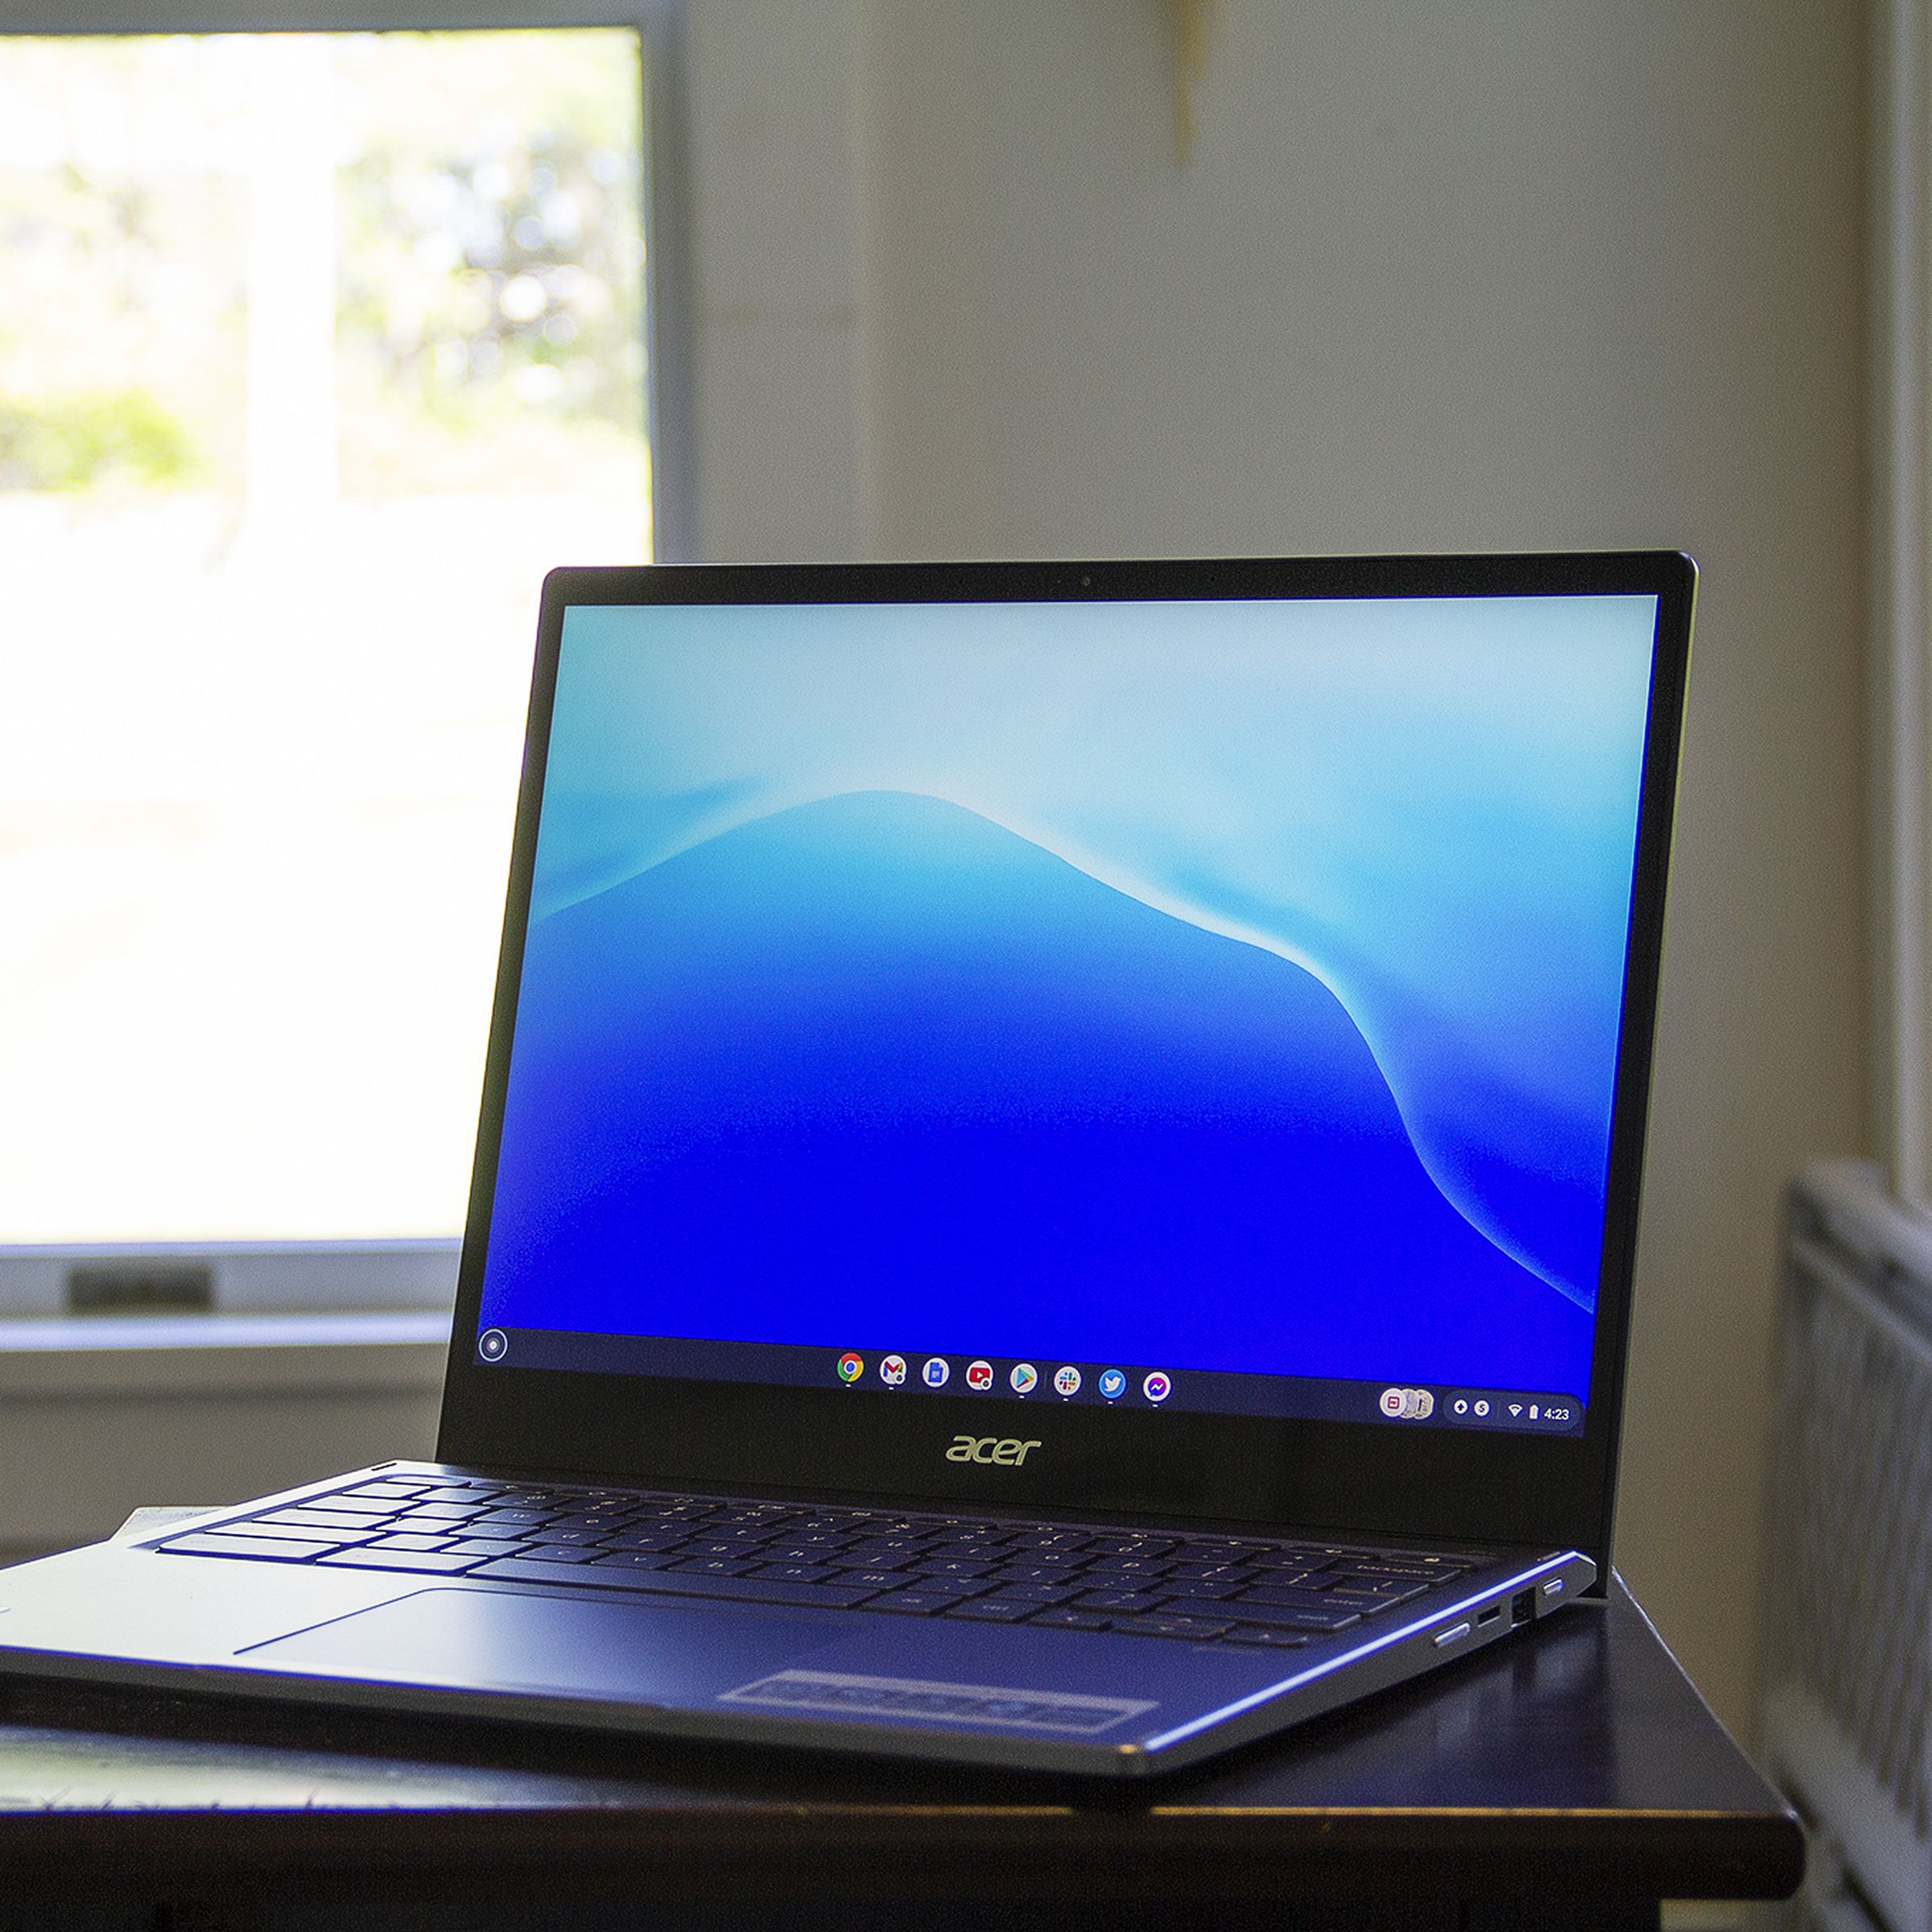 The Acer Chromebook Spin 713 on a small table in front of a bright window. The screen displays a blue pattern.